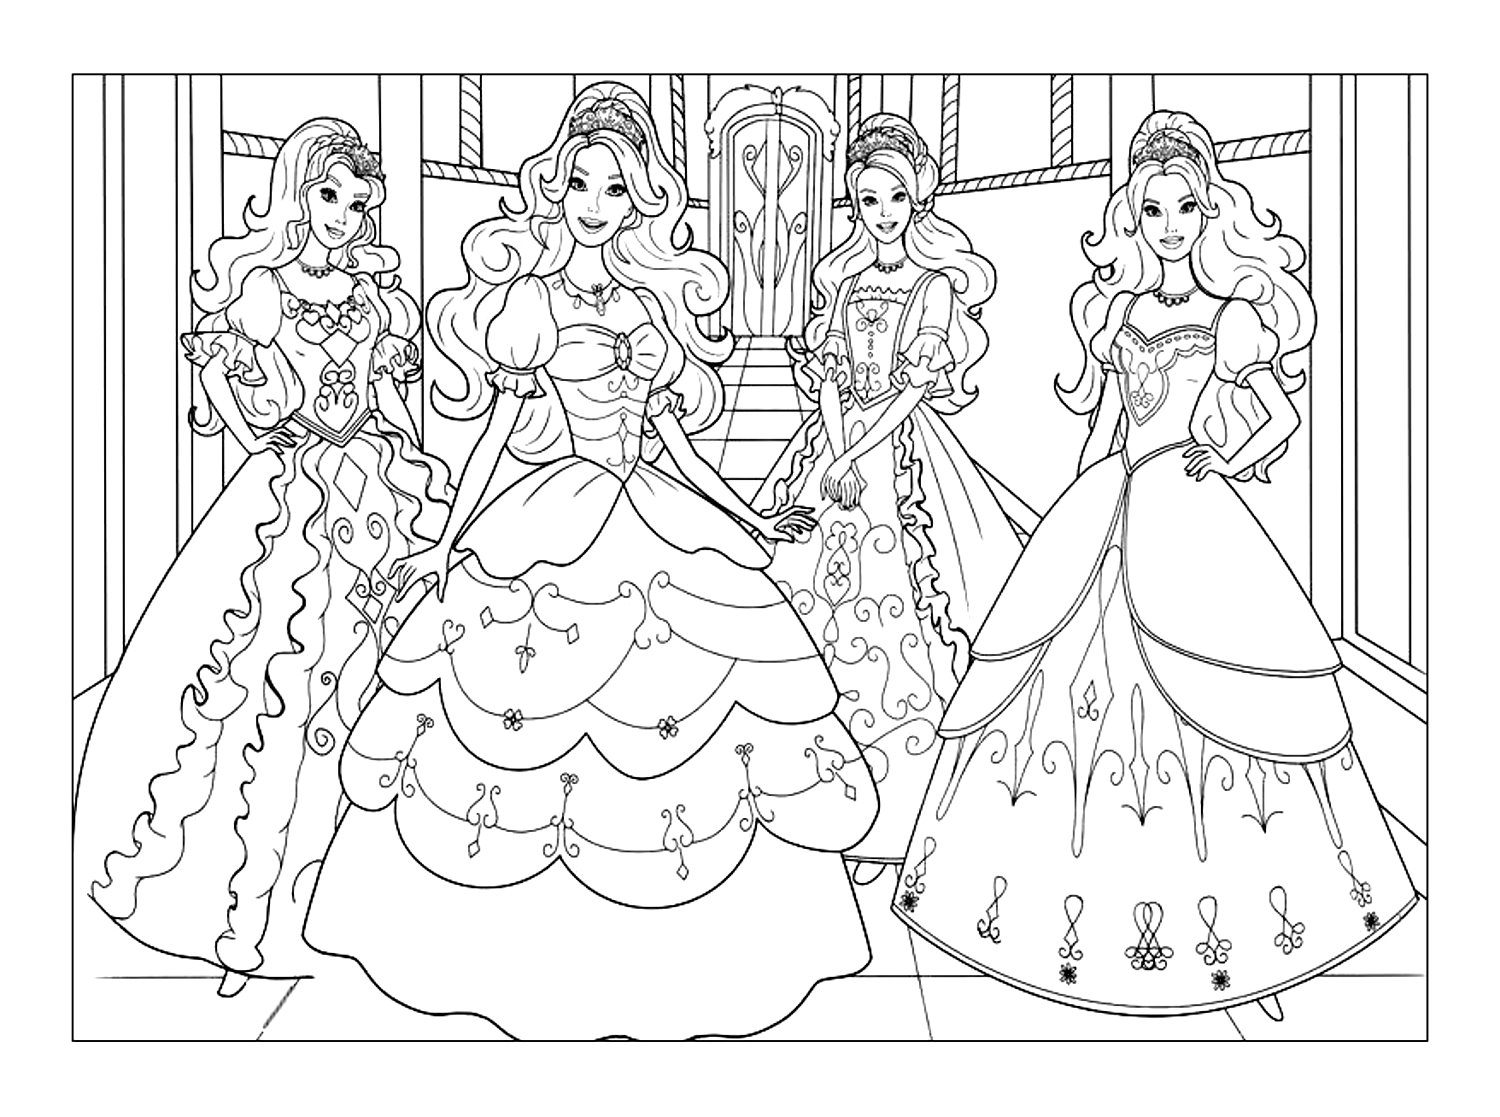 Pretty Barbie princesses. Four Barbie princesses in gorgeous dresses. An intricate coloring scheme that's sure to take you back to childhood.